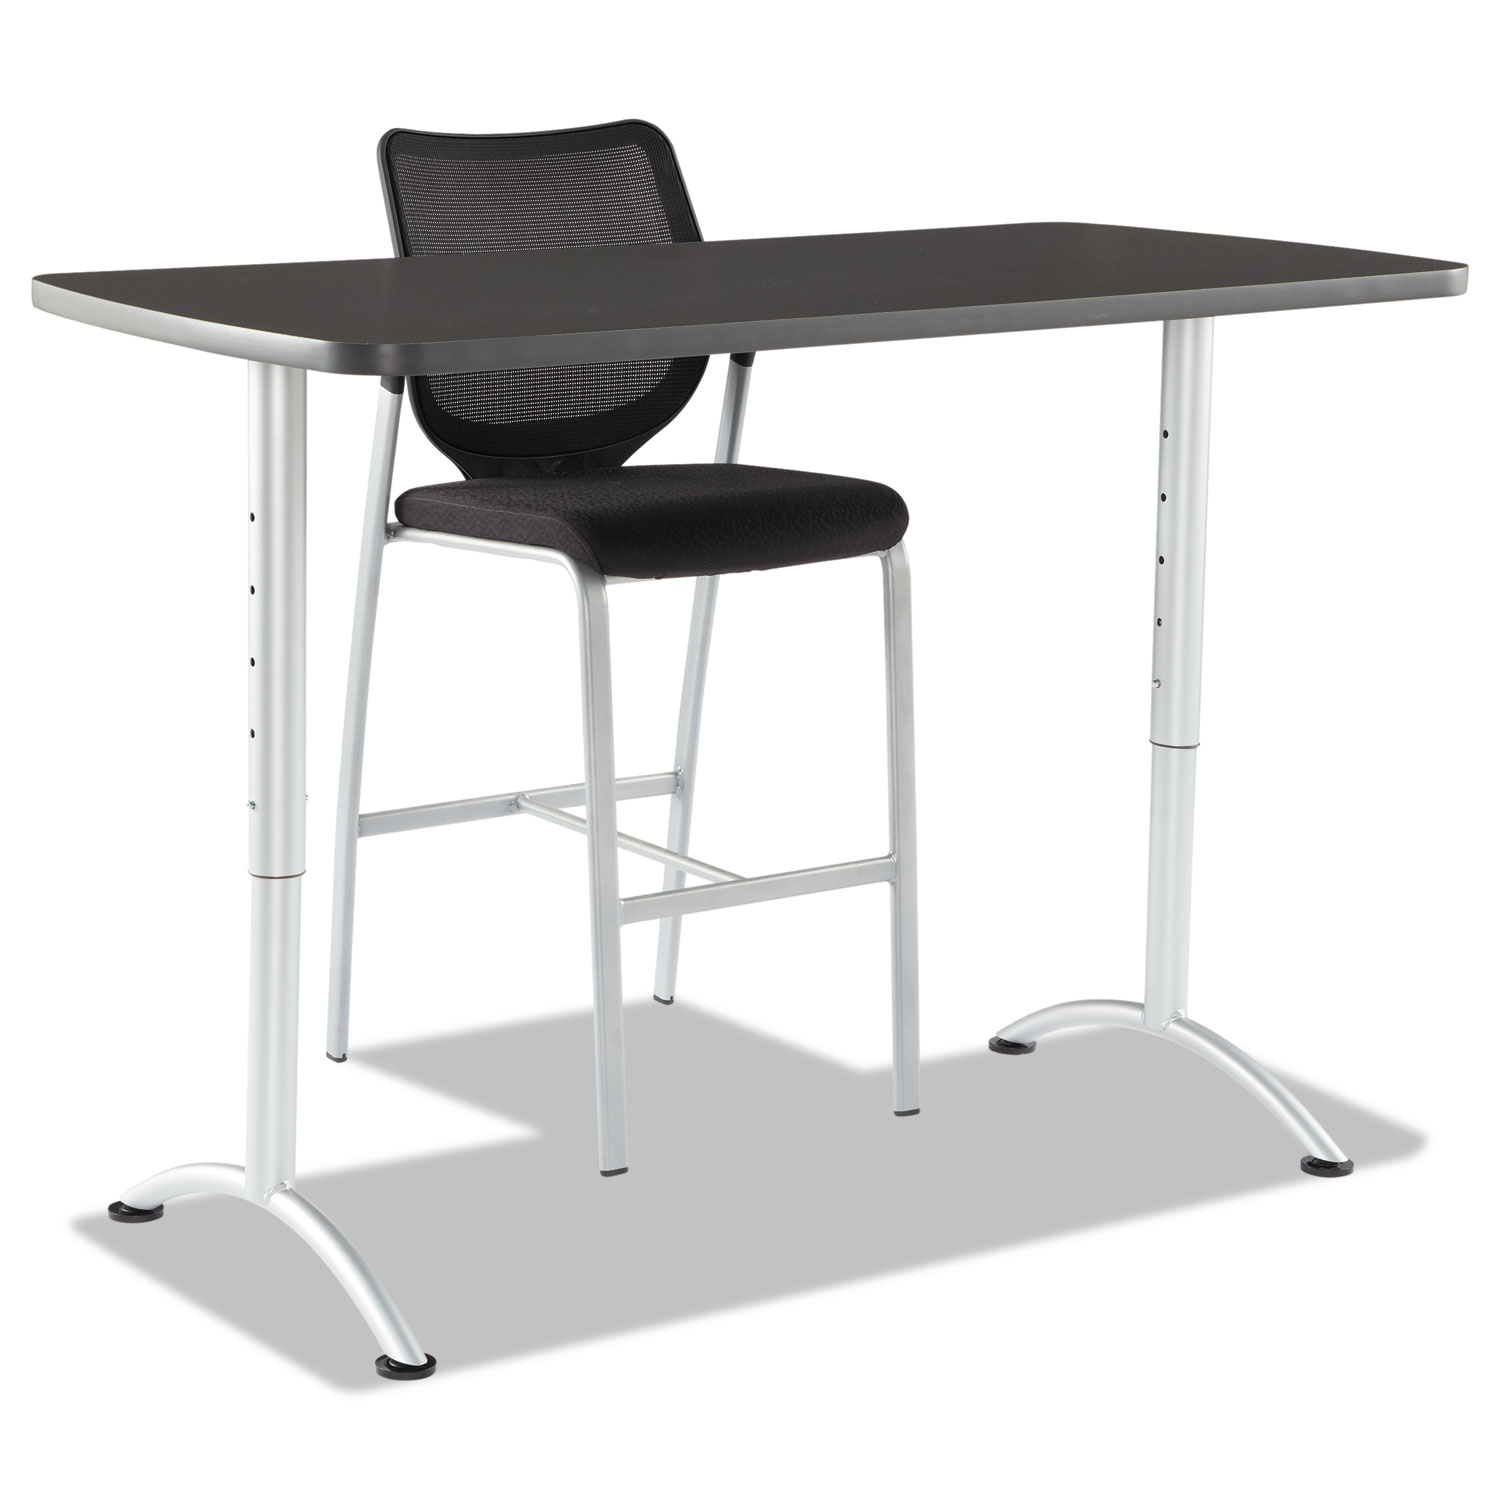 ARC Sit-to-Stand Tables, Rectangular Top, 30w x 60d x 30-42h, Graphite/Silver